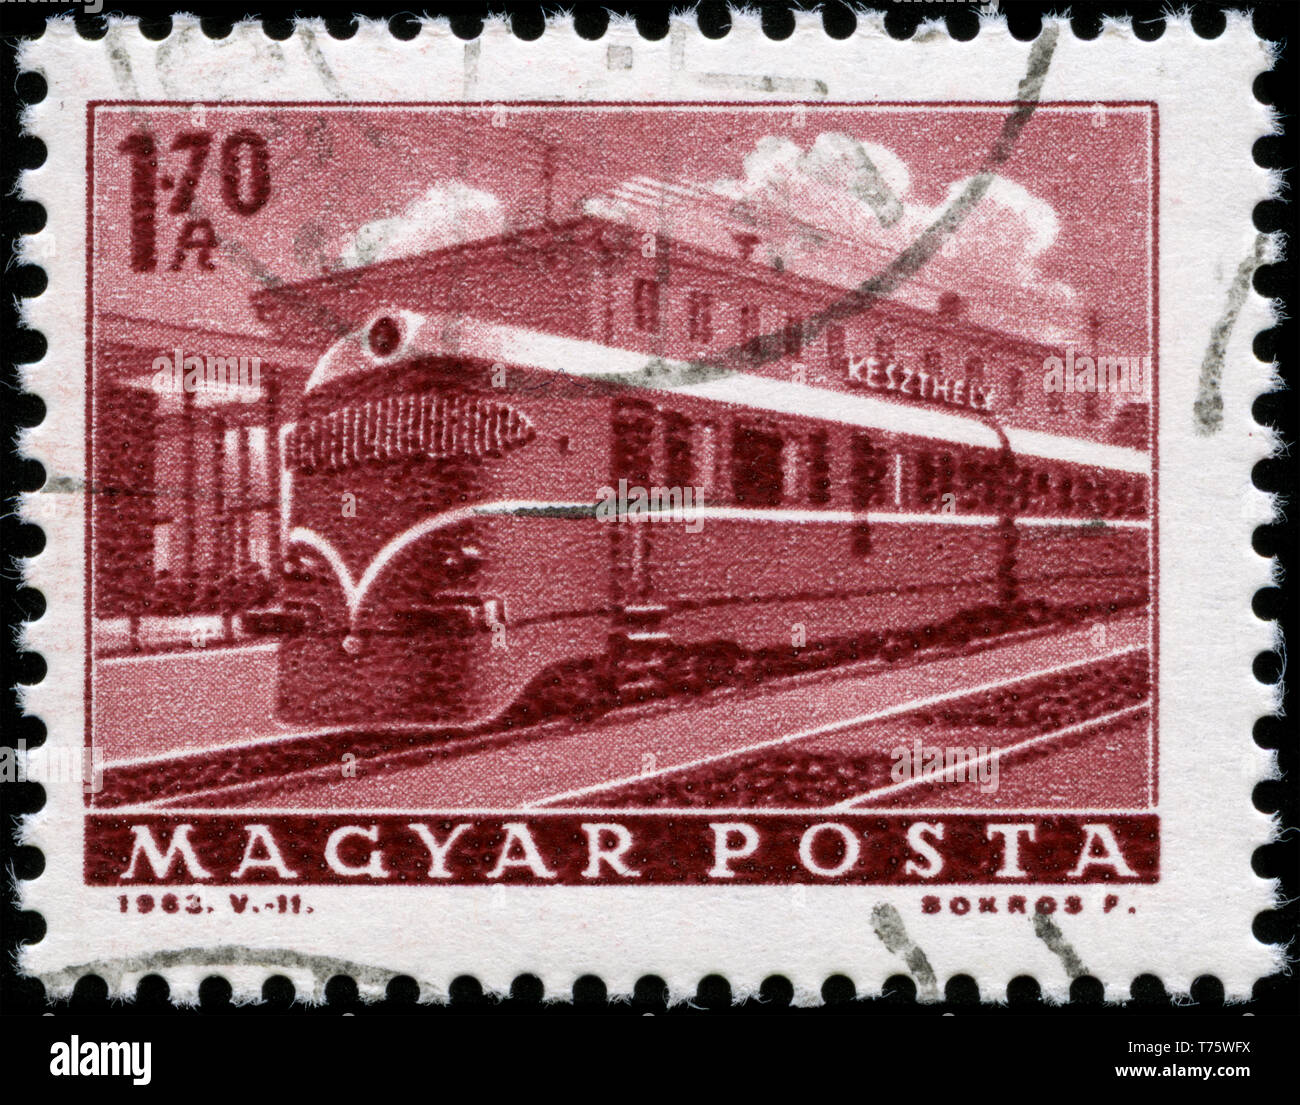 Postage stamp from Hungary in the Transport and Telecommunication series issued in 1963 Stock Photo